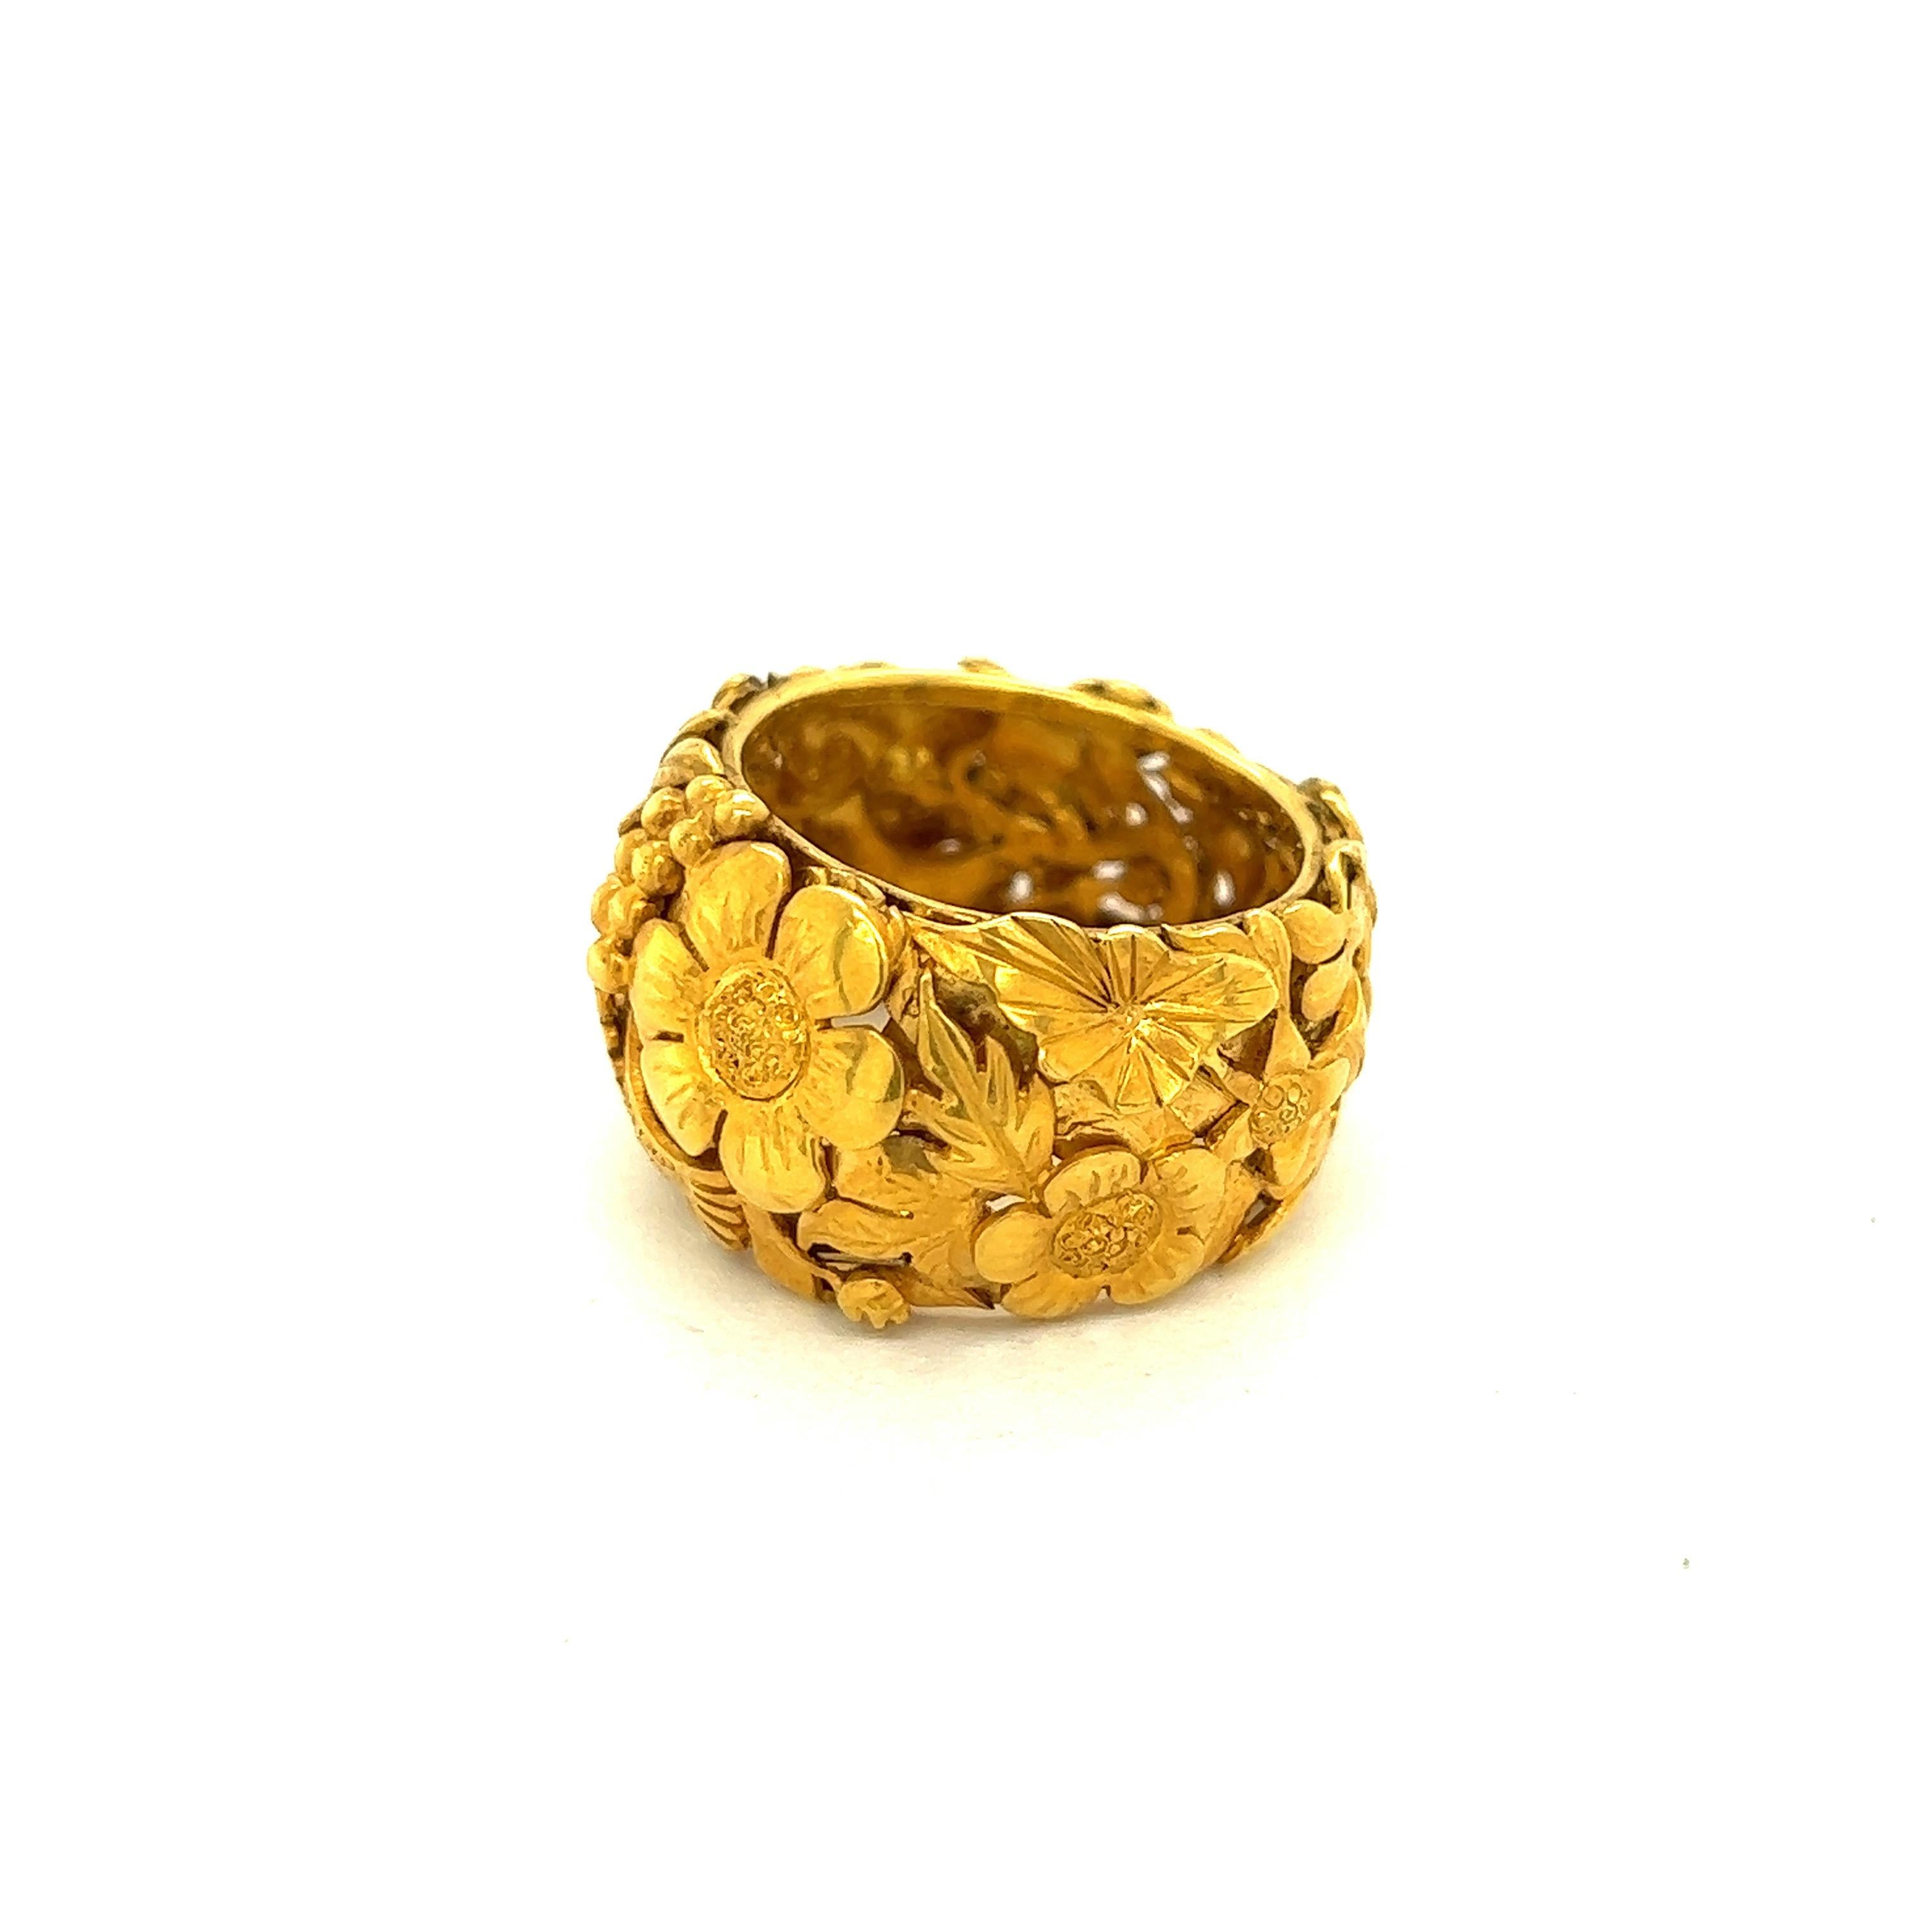 Pippa Small Garden Flower Ring

A 22 karat yellow gold band ring covered with a flower garden motif, filled with flowers and leaves of all kinds; created and designed by Pippa Small

Size: Top width 1.4 cm; 6.5 US
Total weight: 10.7 grams